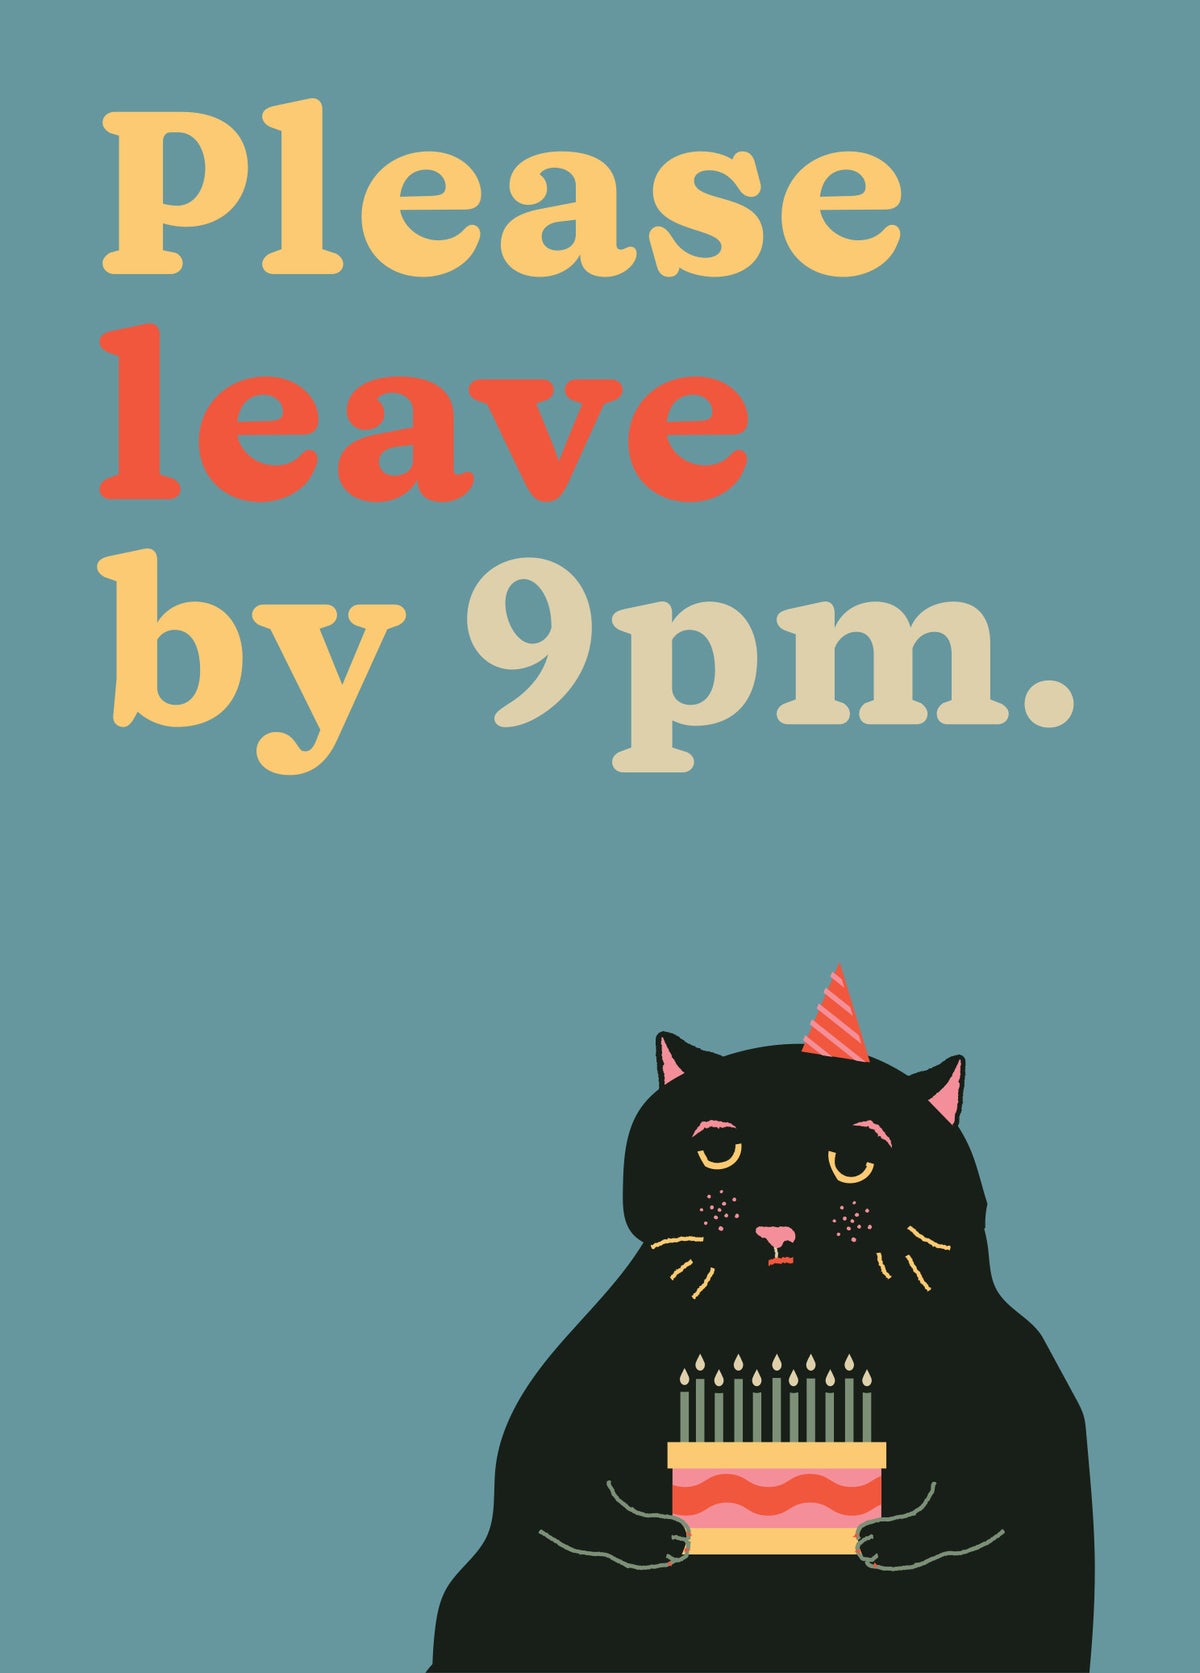 Please Leave by 9 Funny Cat Birthday Card by Betiobca at penny black